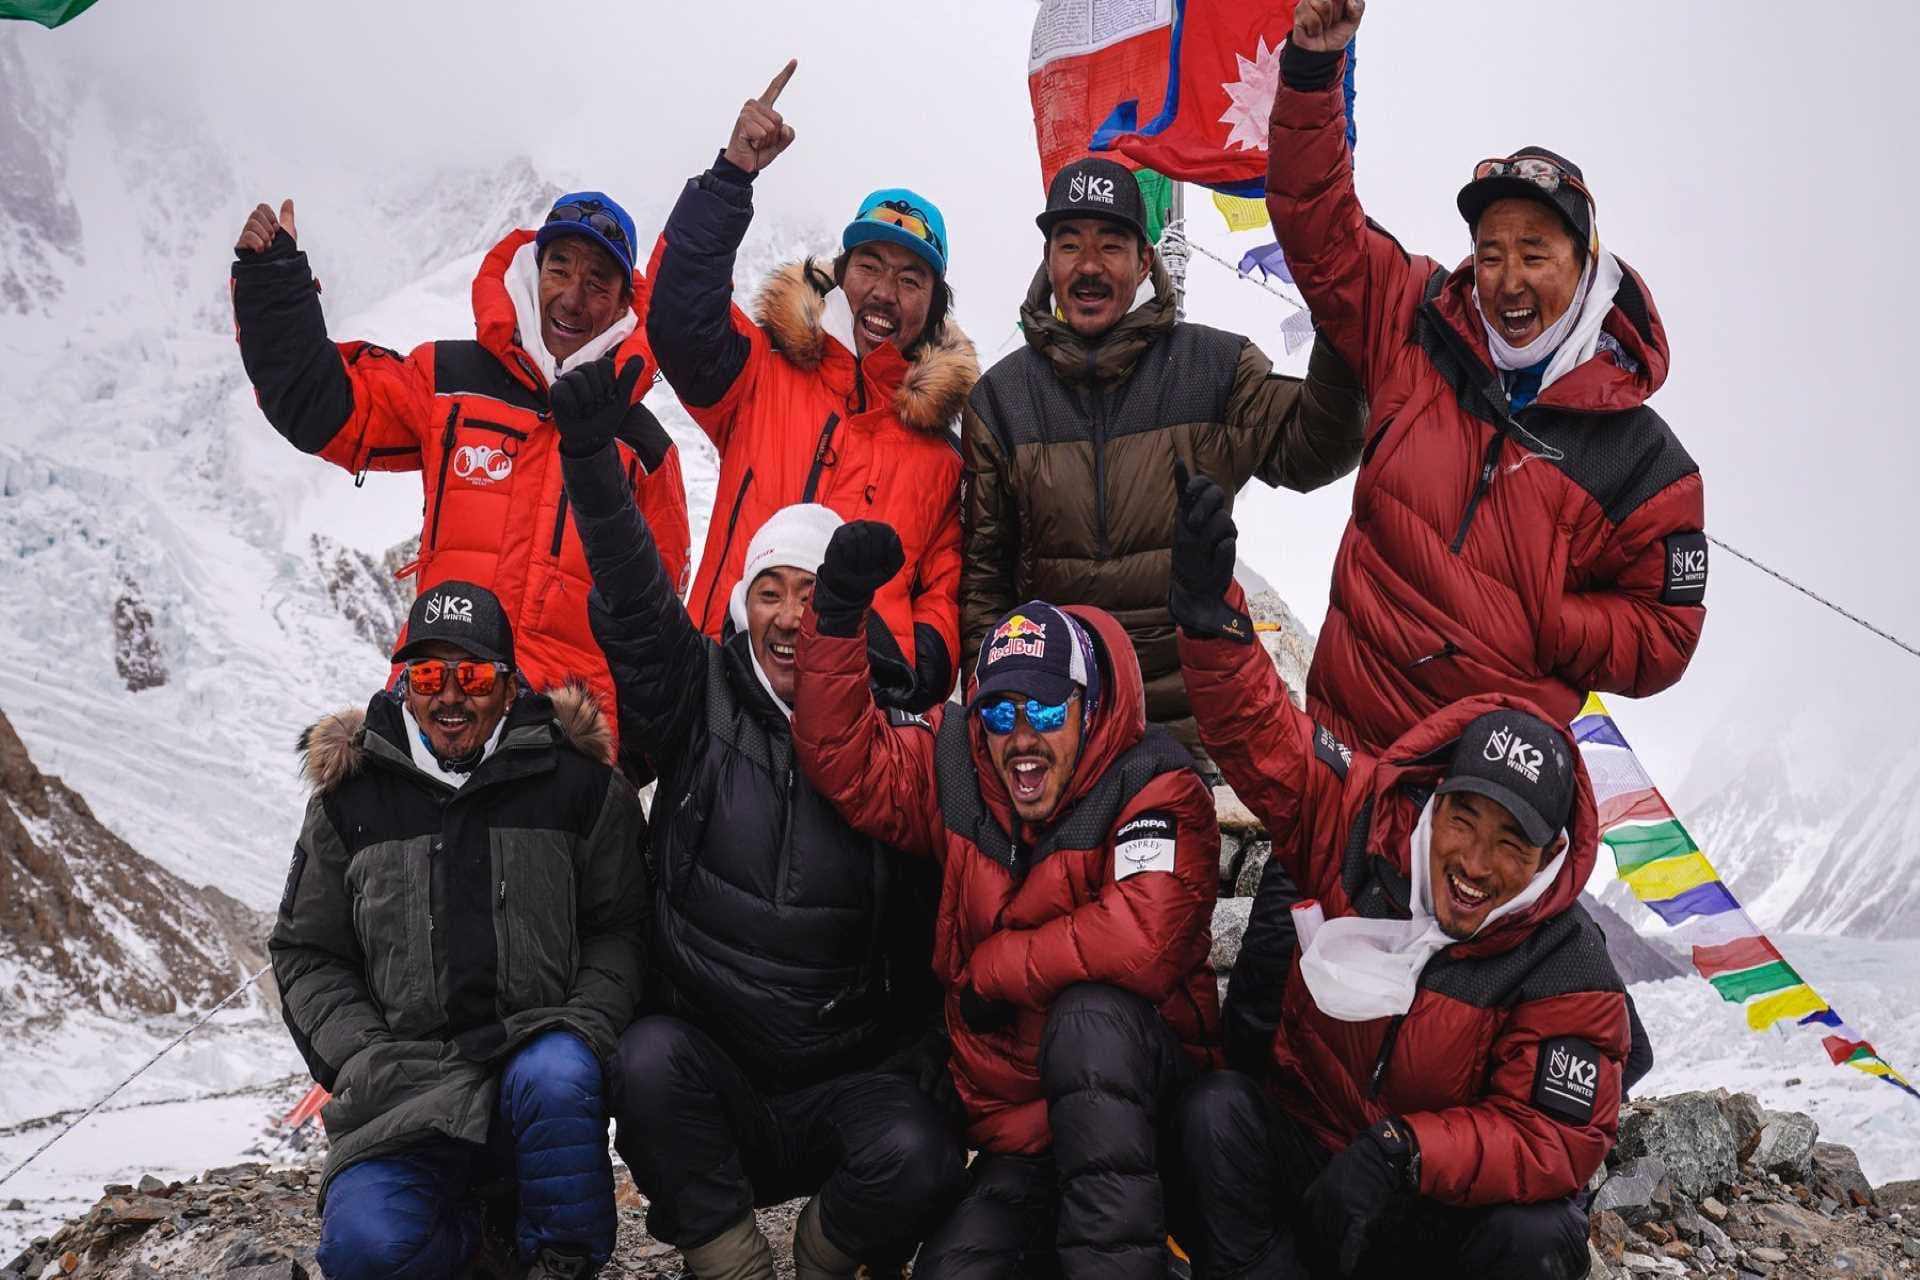 Nepali Climbers Make History With First Winter Ascent of K2, The Savage